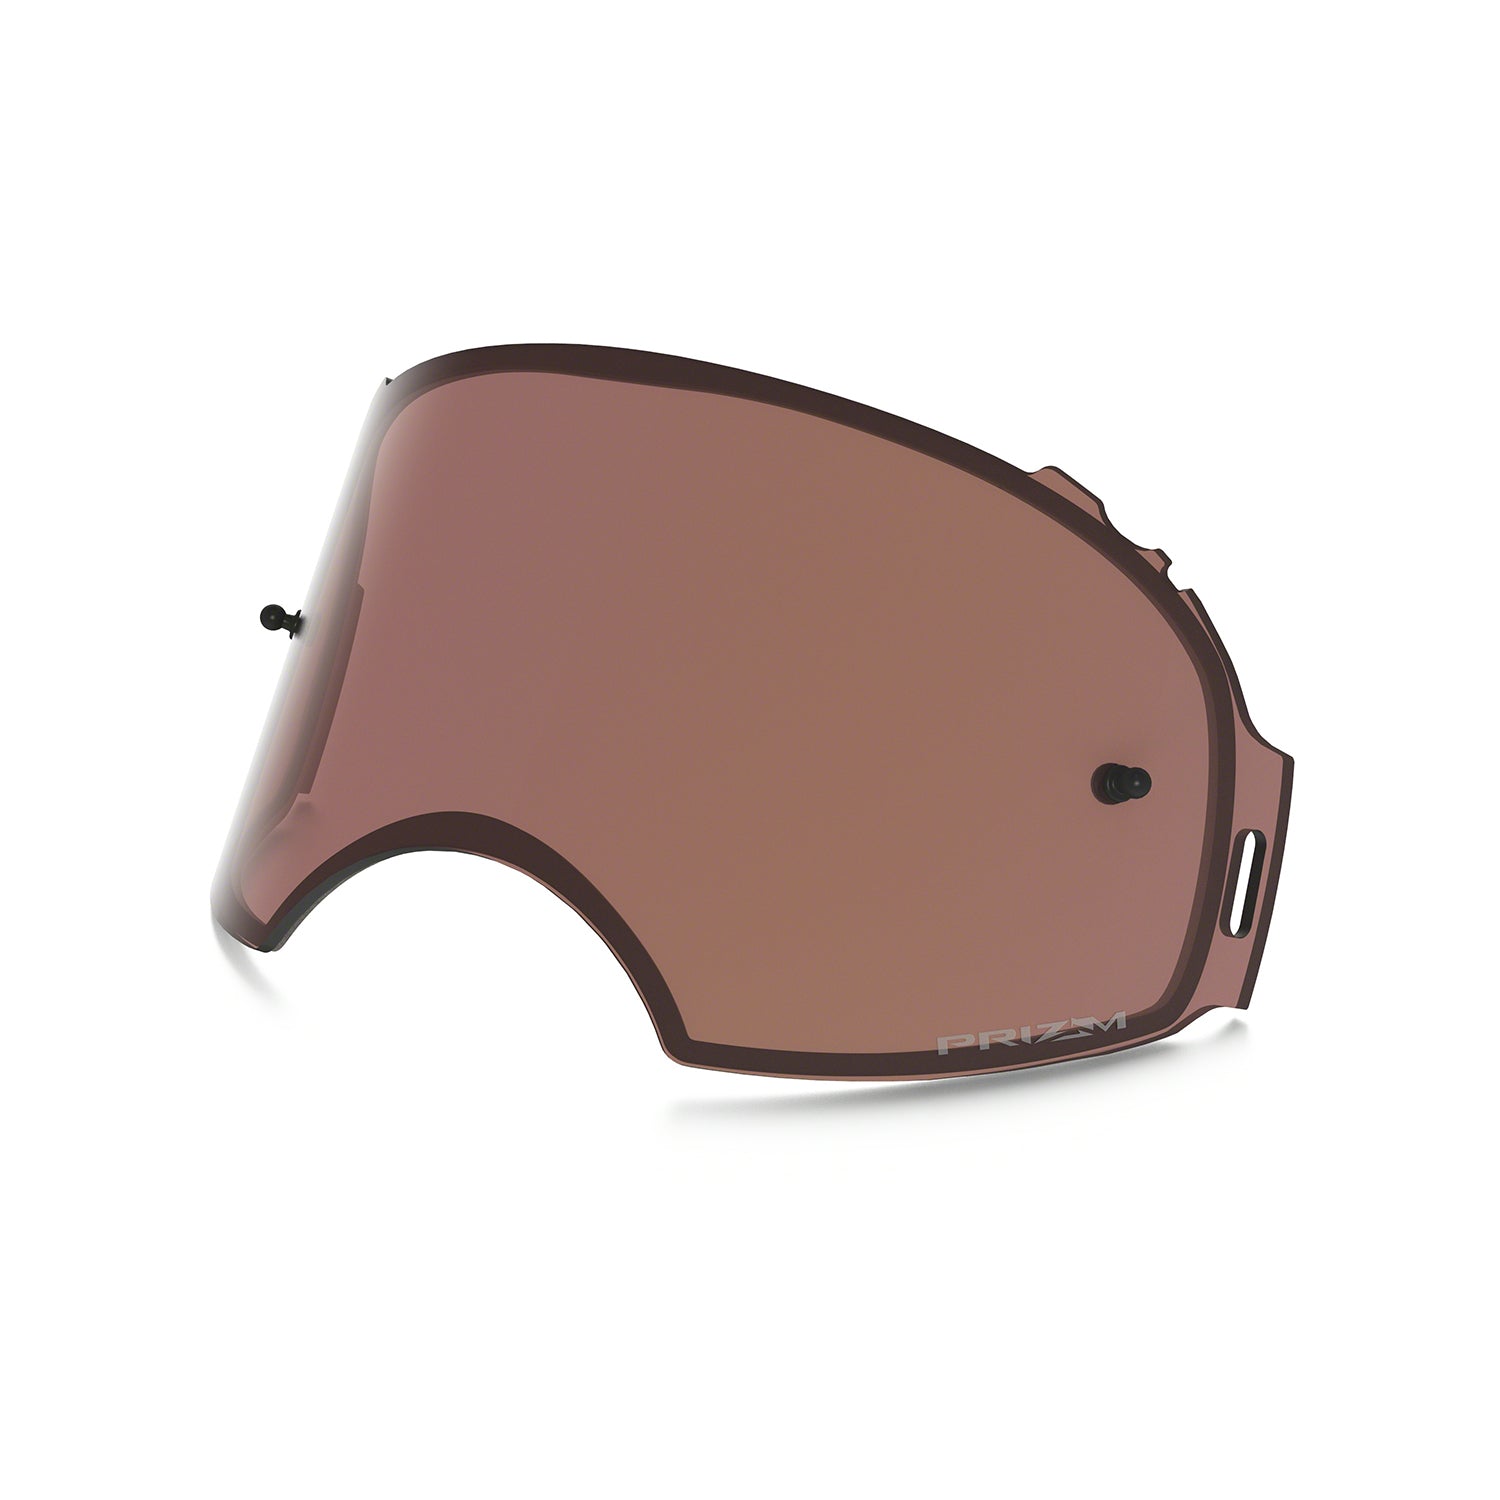 Oakley Airbrake MX Replacement Lens in Prizm Bronze Color